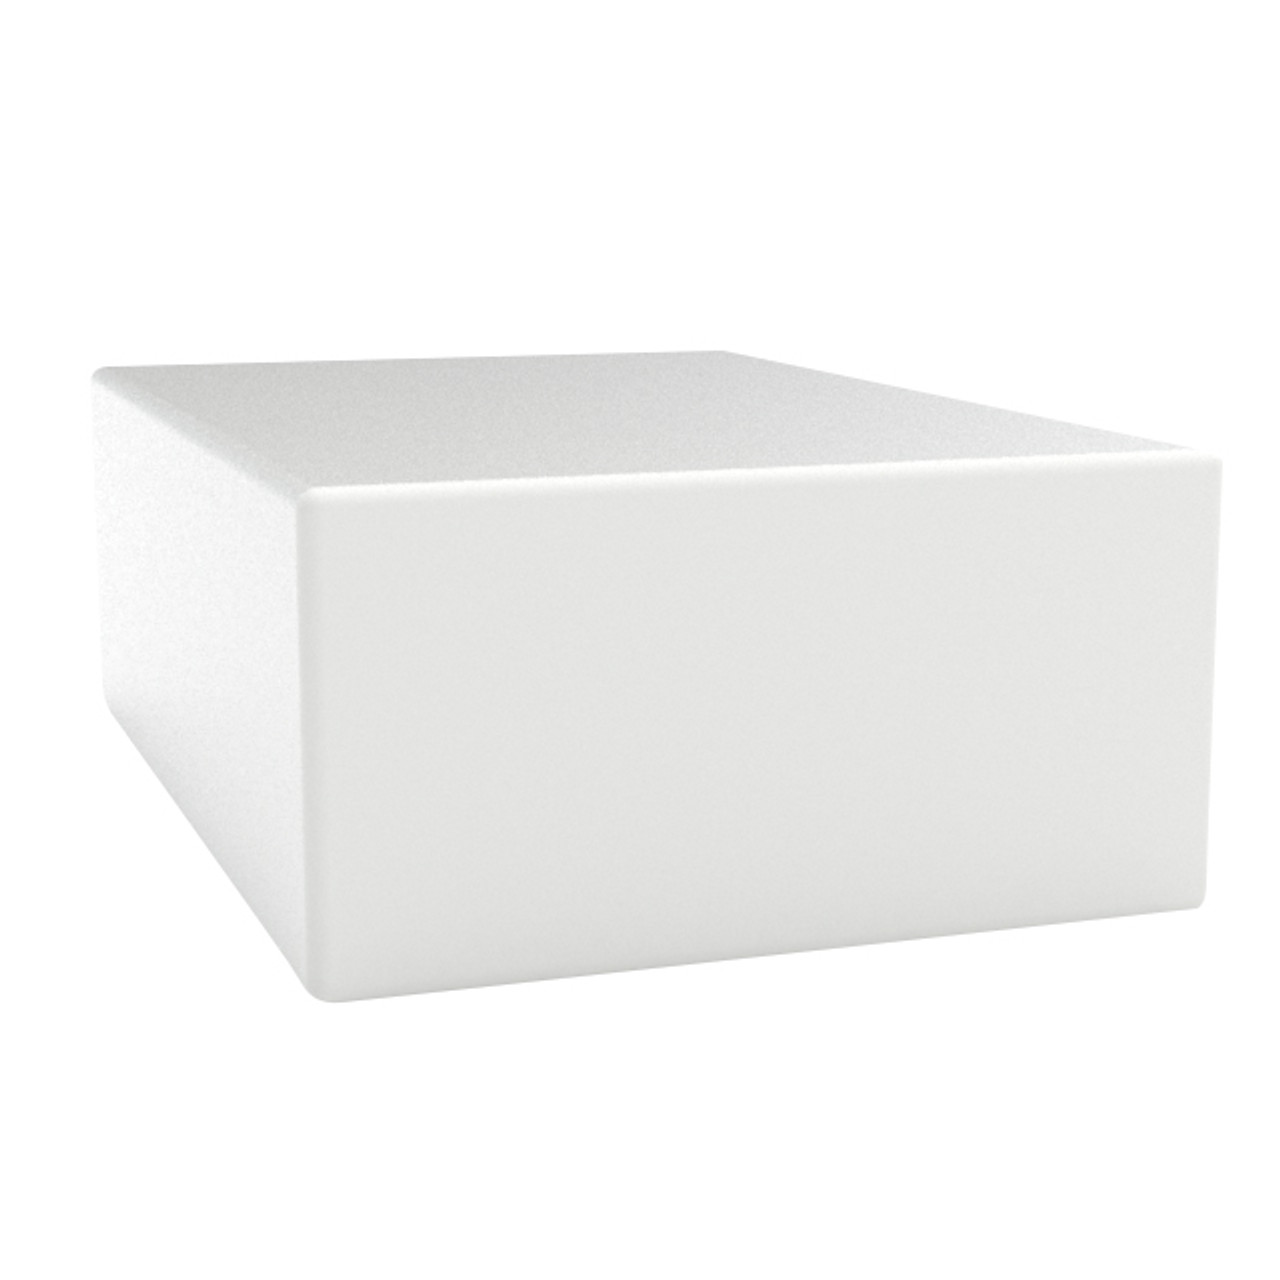 An image of a 17 Gallon PE Ronco White Cylindrical Open Top Tank | 17LDPE